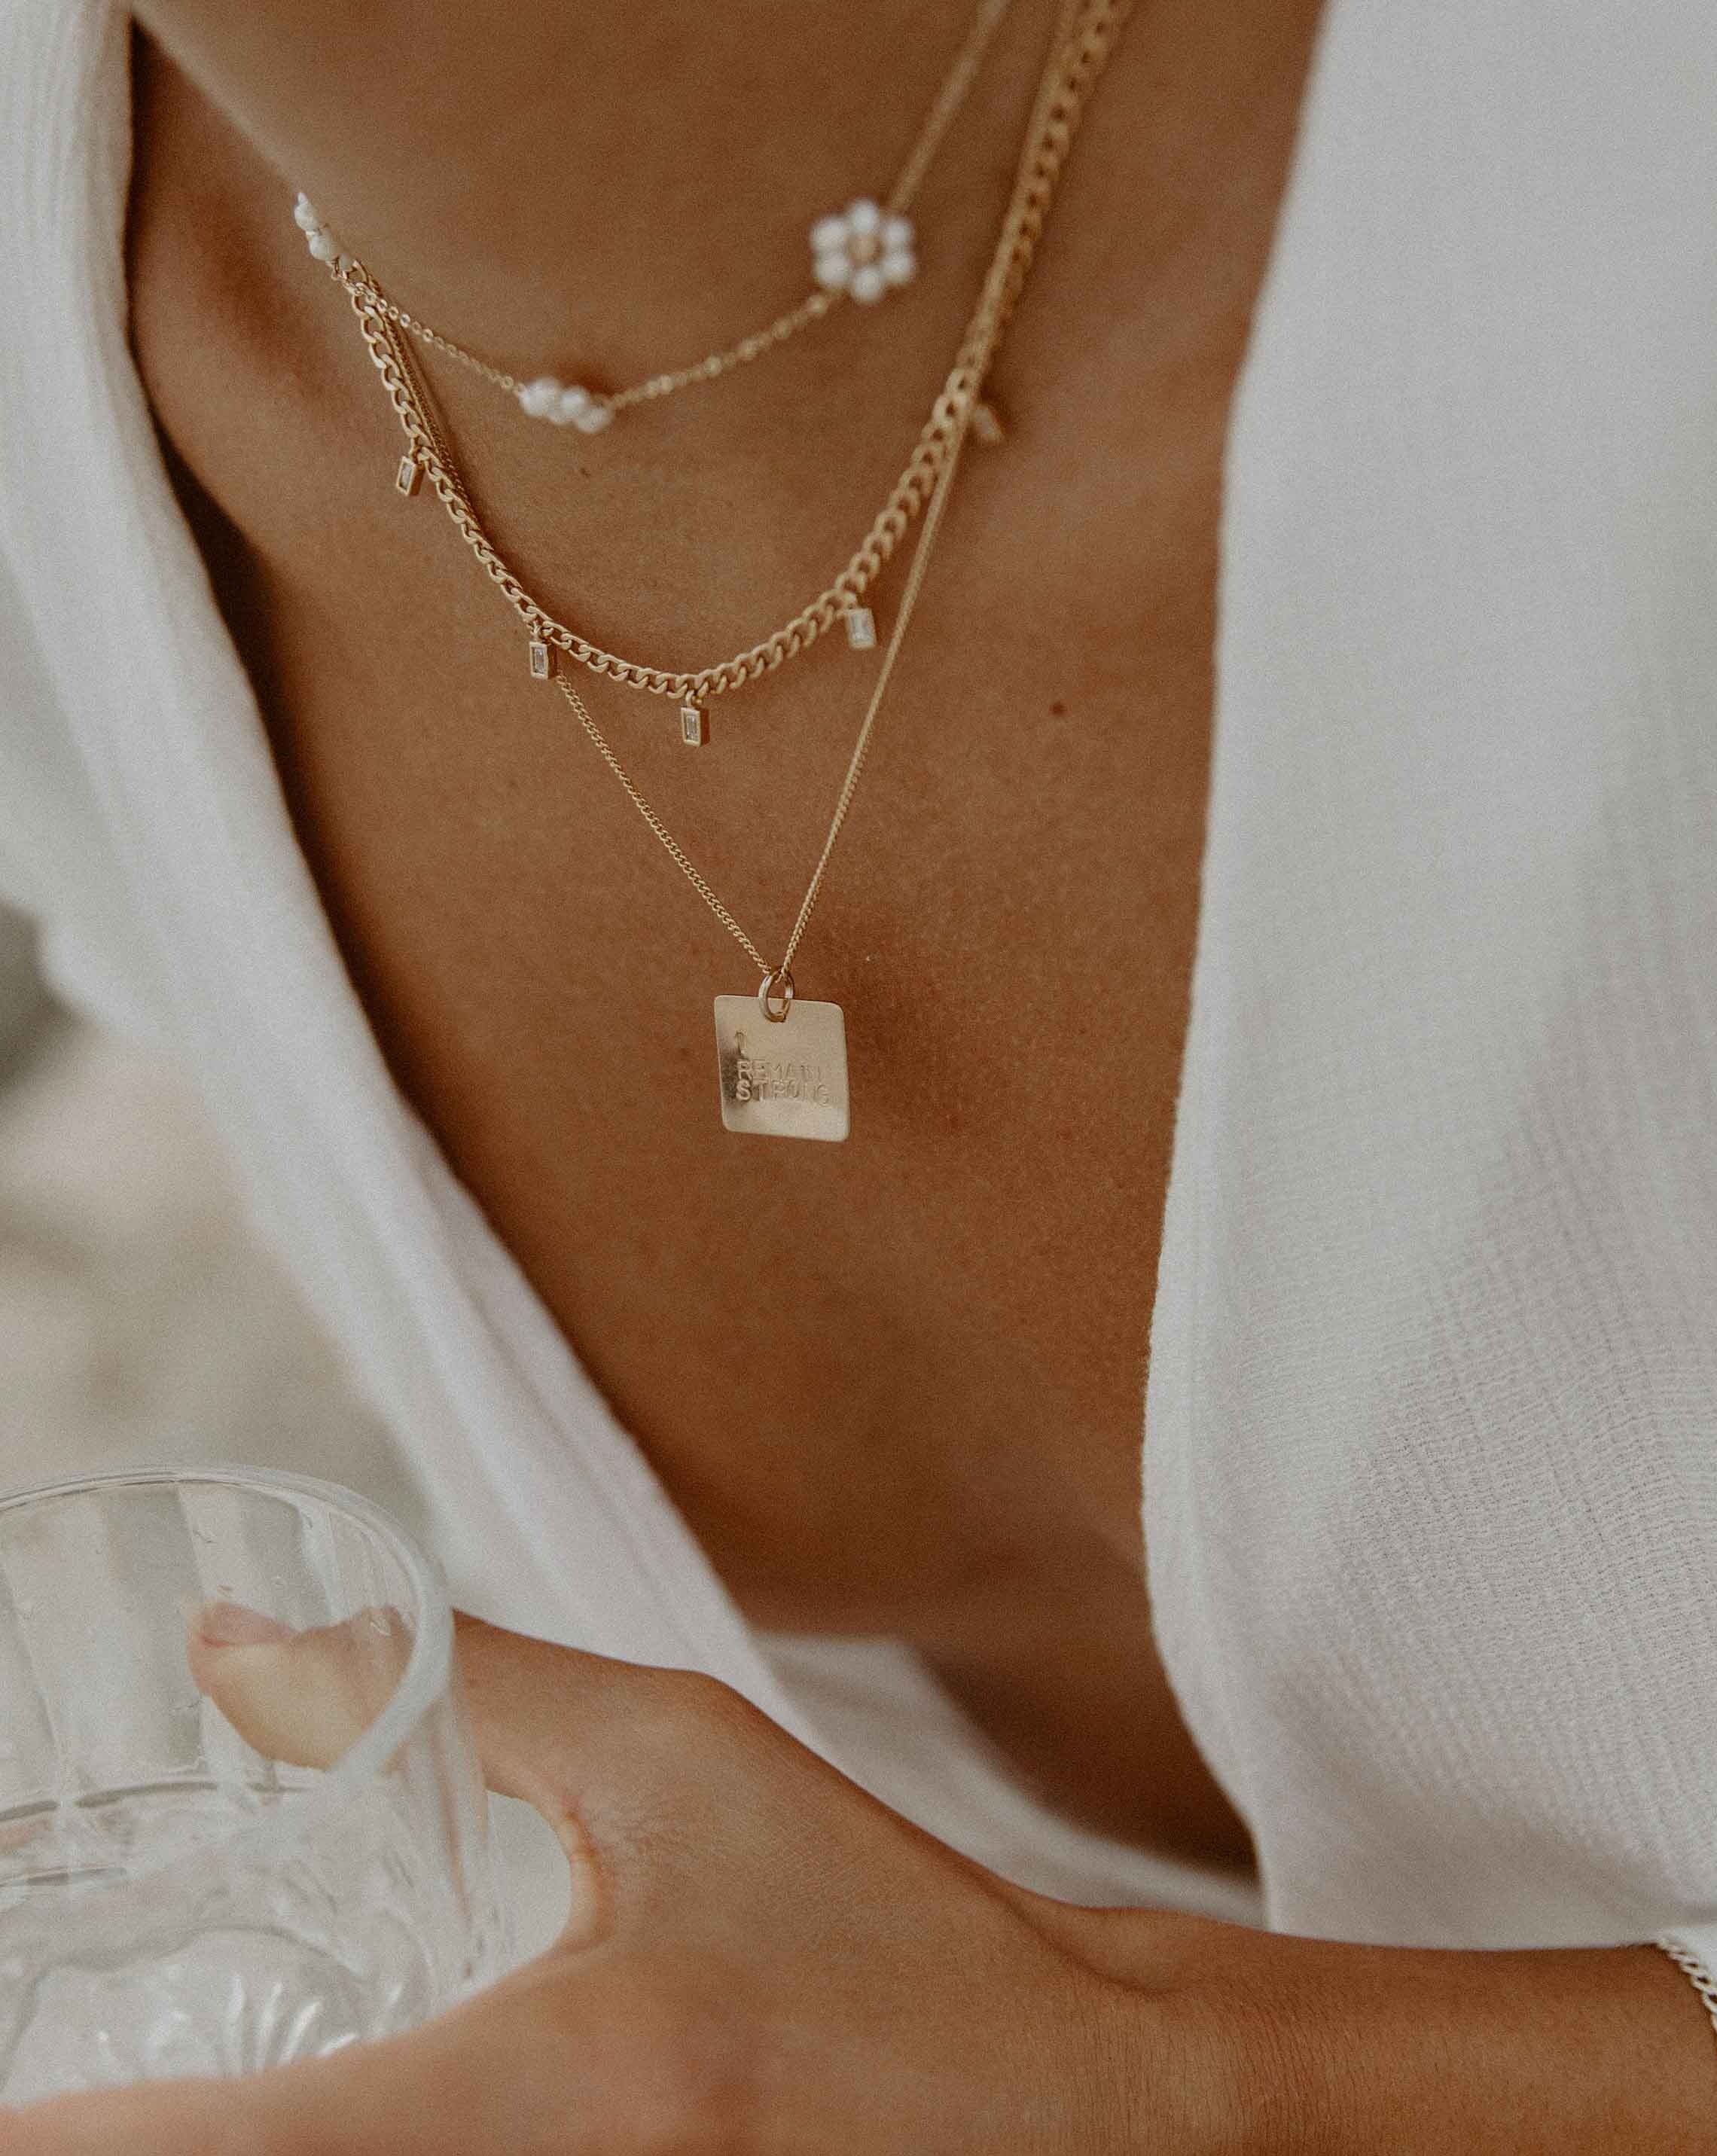 Mia Necklace by KOZAKH. A 16 to 18 inch adjustable length Flat Cuban Link Chain necklace, crafted in 14K Gold Filled, featuring square cut Cubic Zirconia charms.